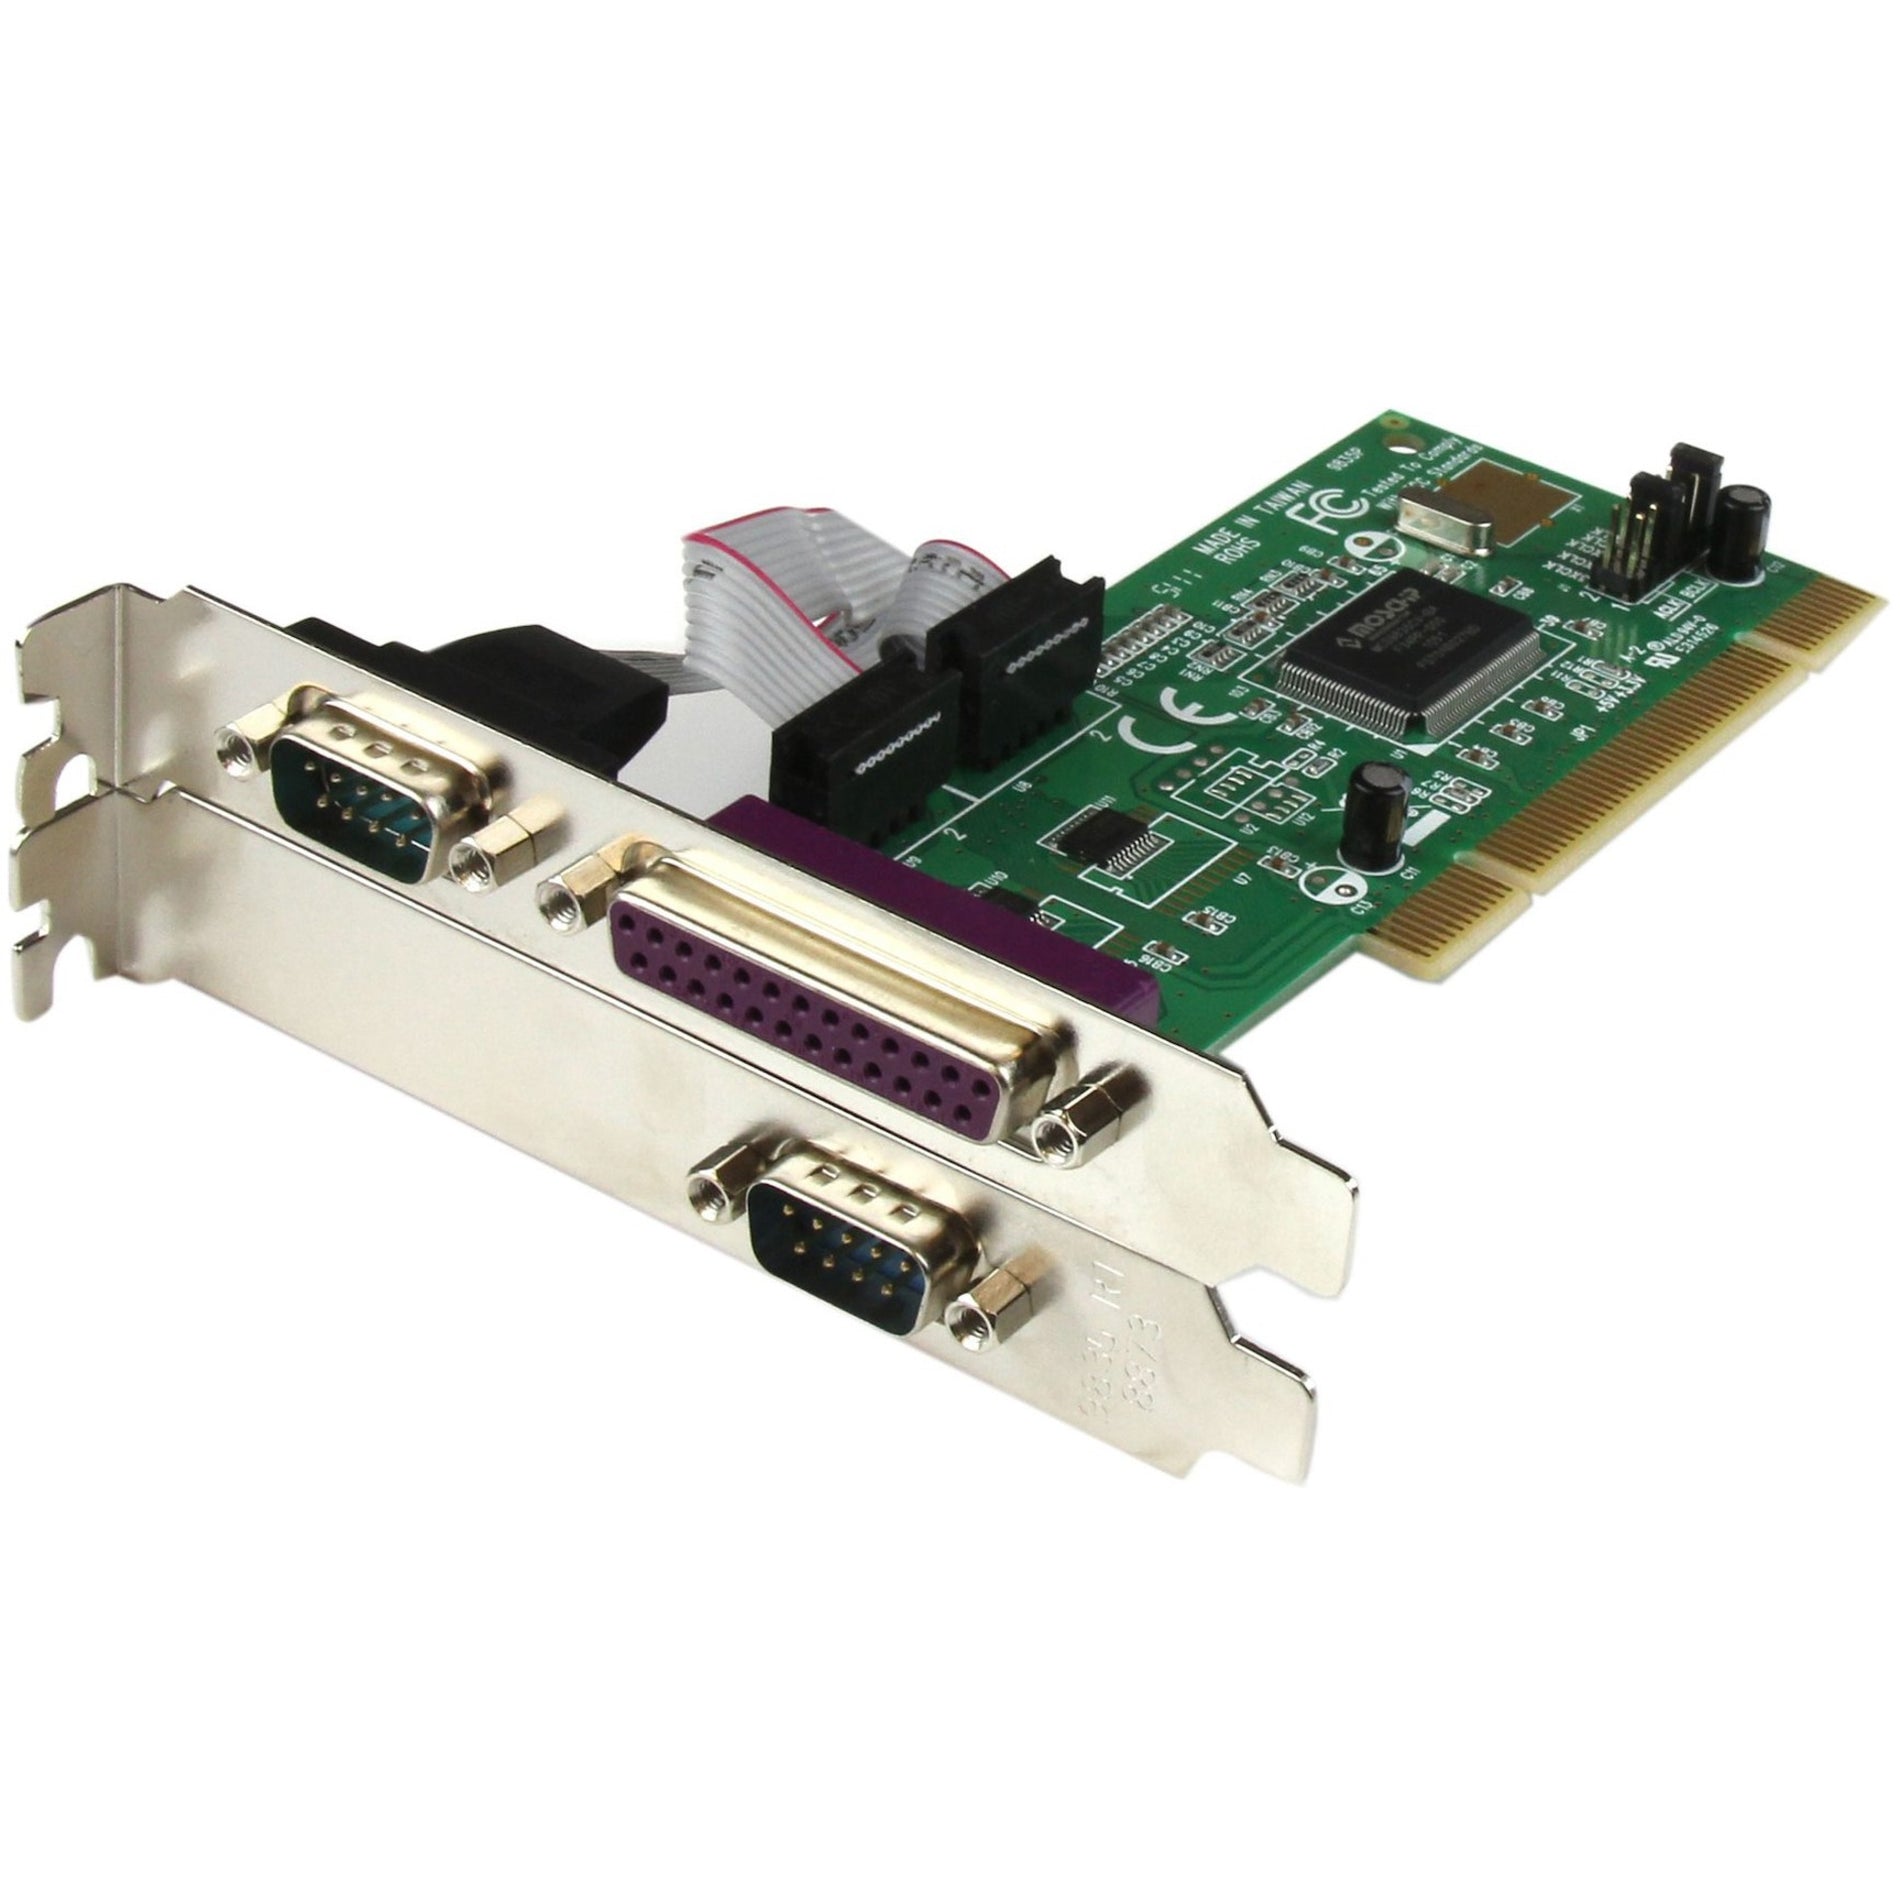 StarTech.com PCI2S1P 2S1P PCI Serial Parallel Combo Card with 16550 UART, Up to 430kB/s Serial Port, EPP/ECP Parallel Mode